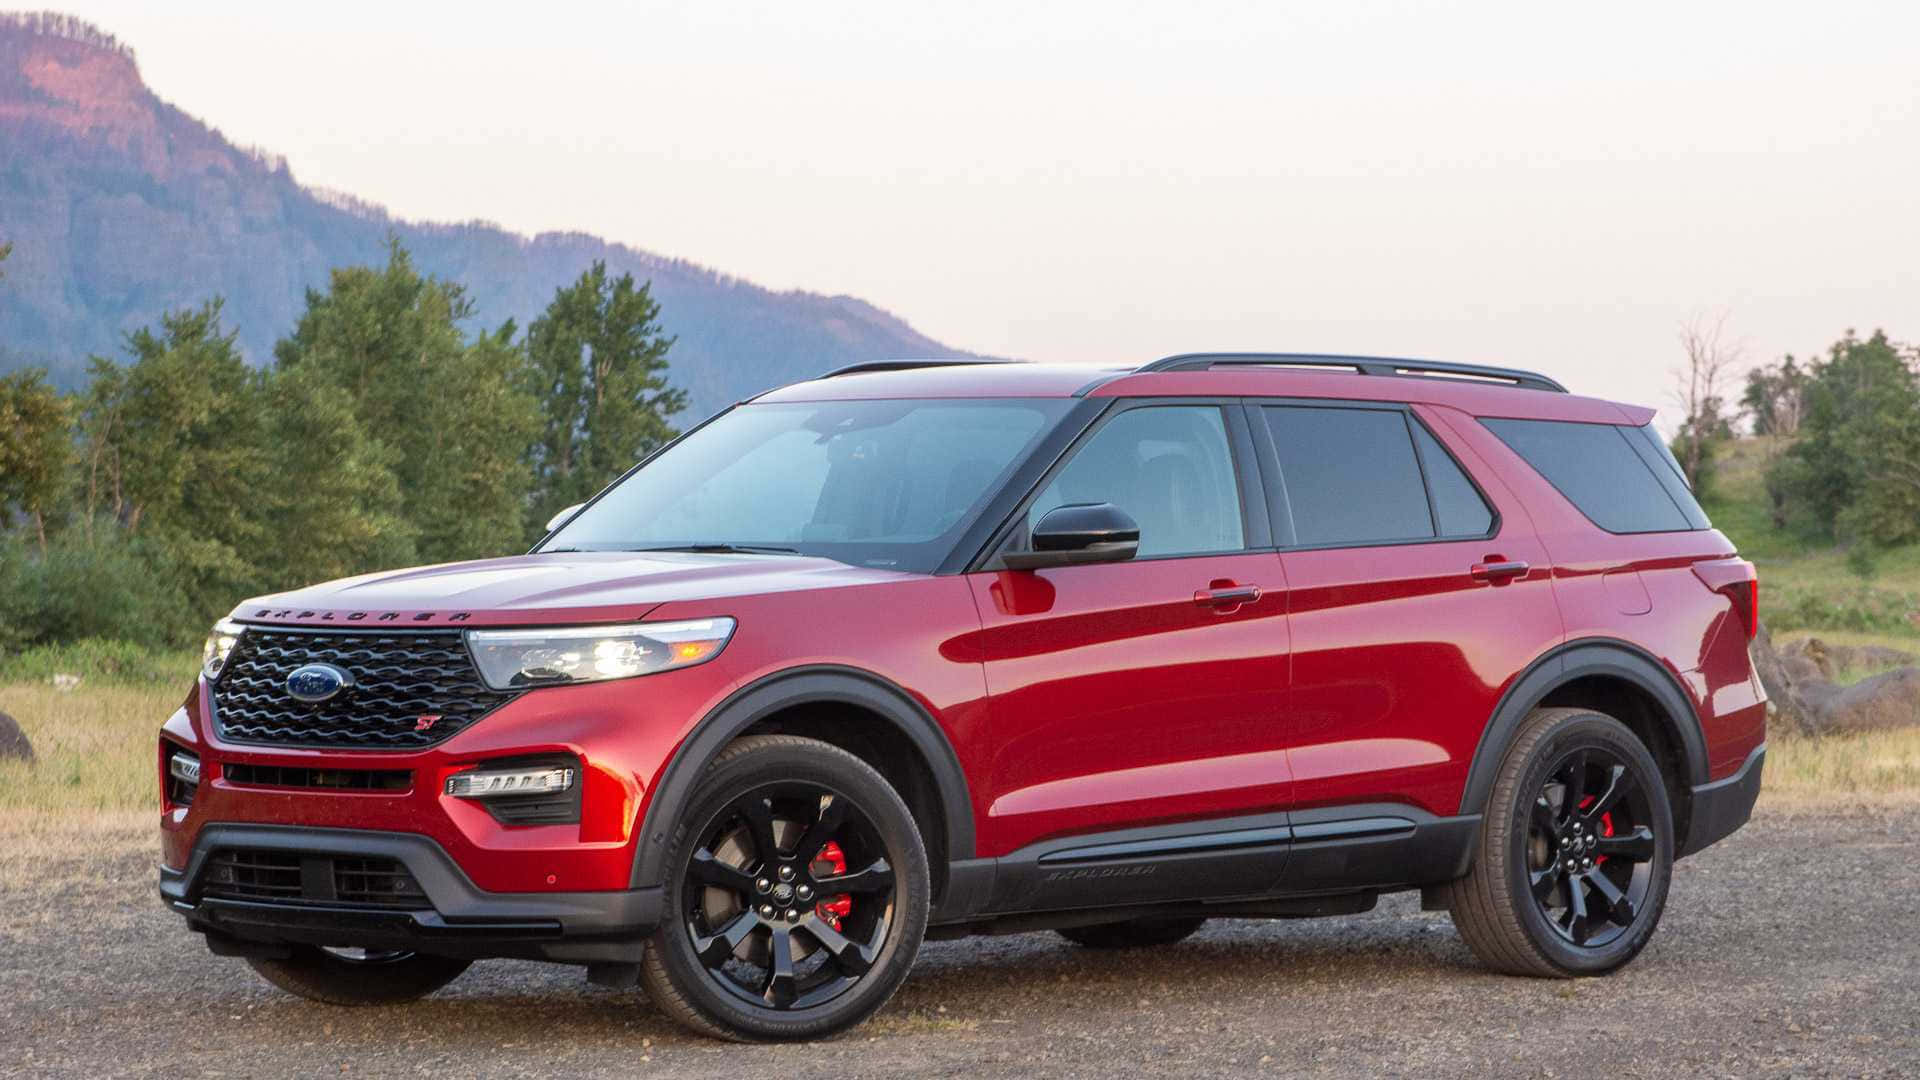 Stunning Ford Explorer dominating the off-road terrain Wallpaper